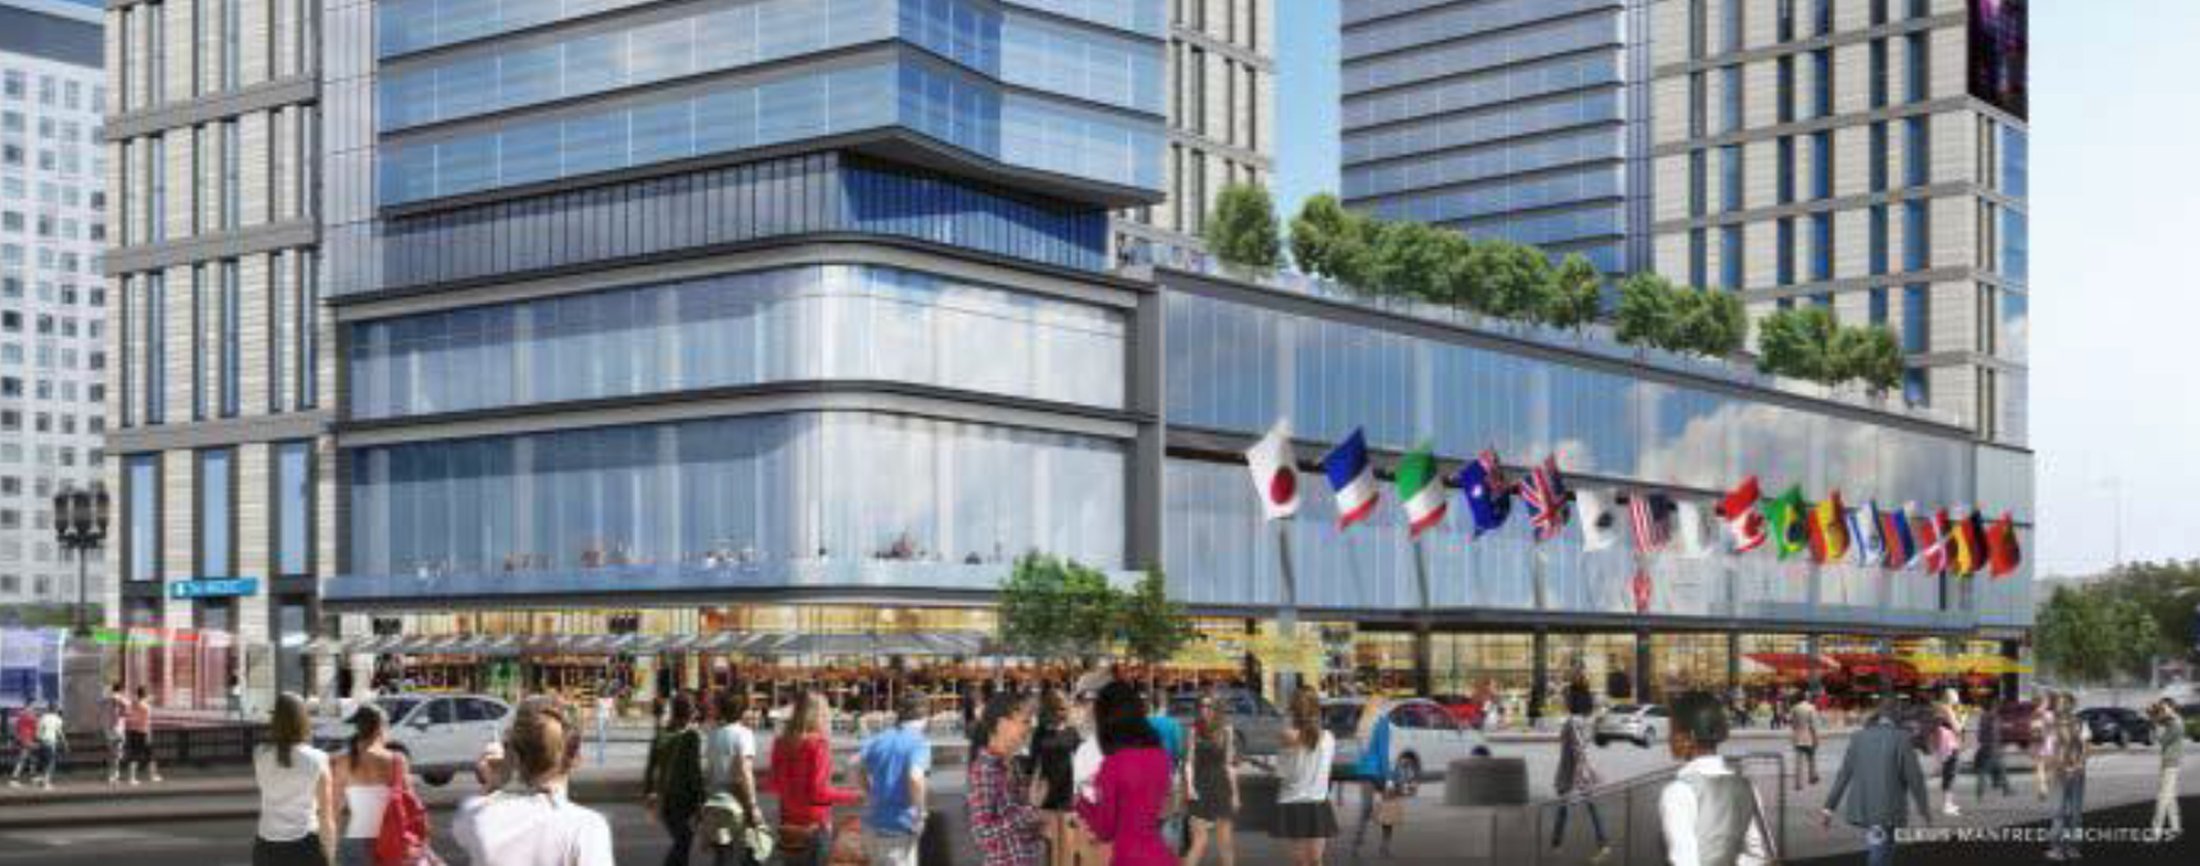 Full-Service Omni Hotel to be Built Across the Street from the BCEC